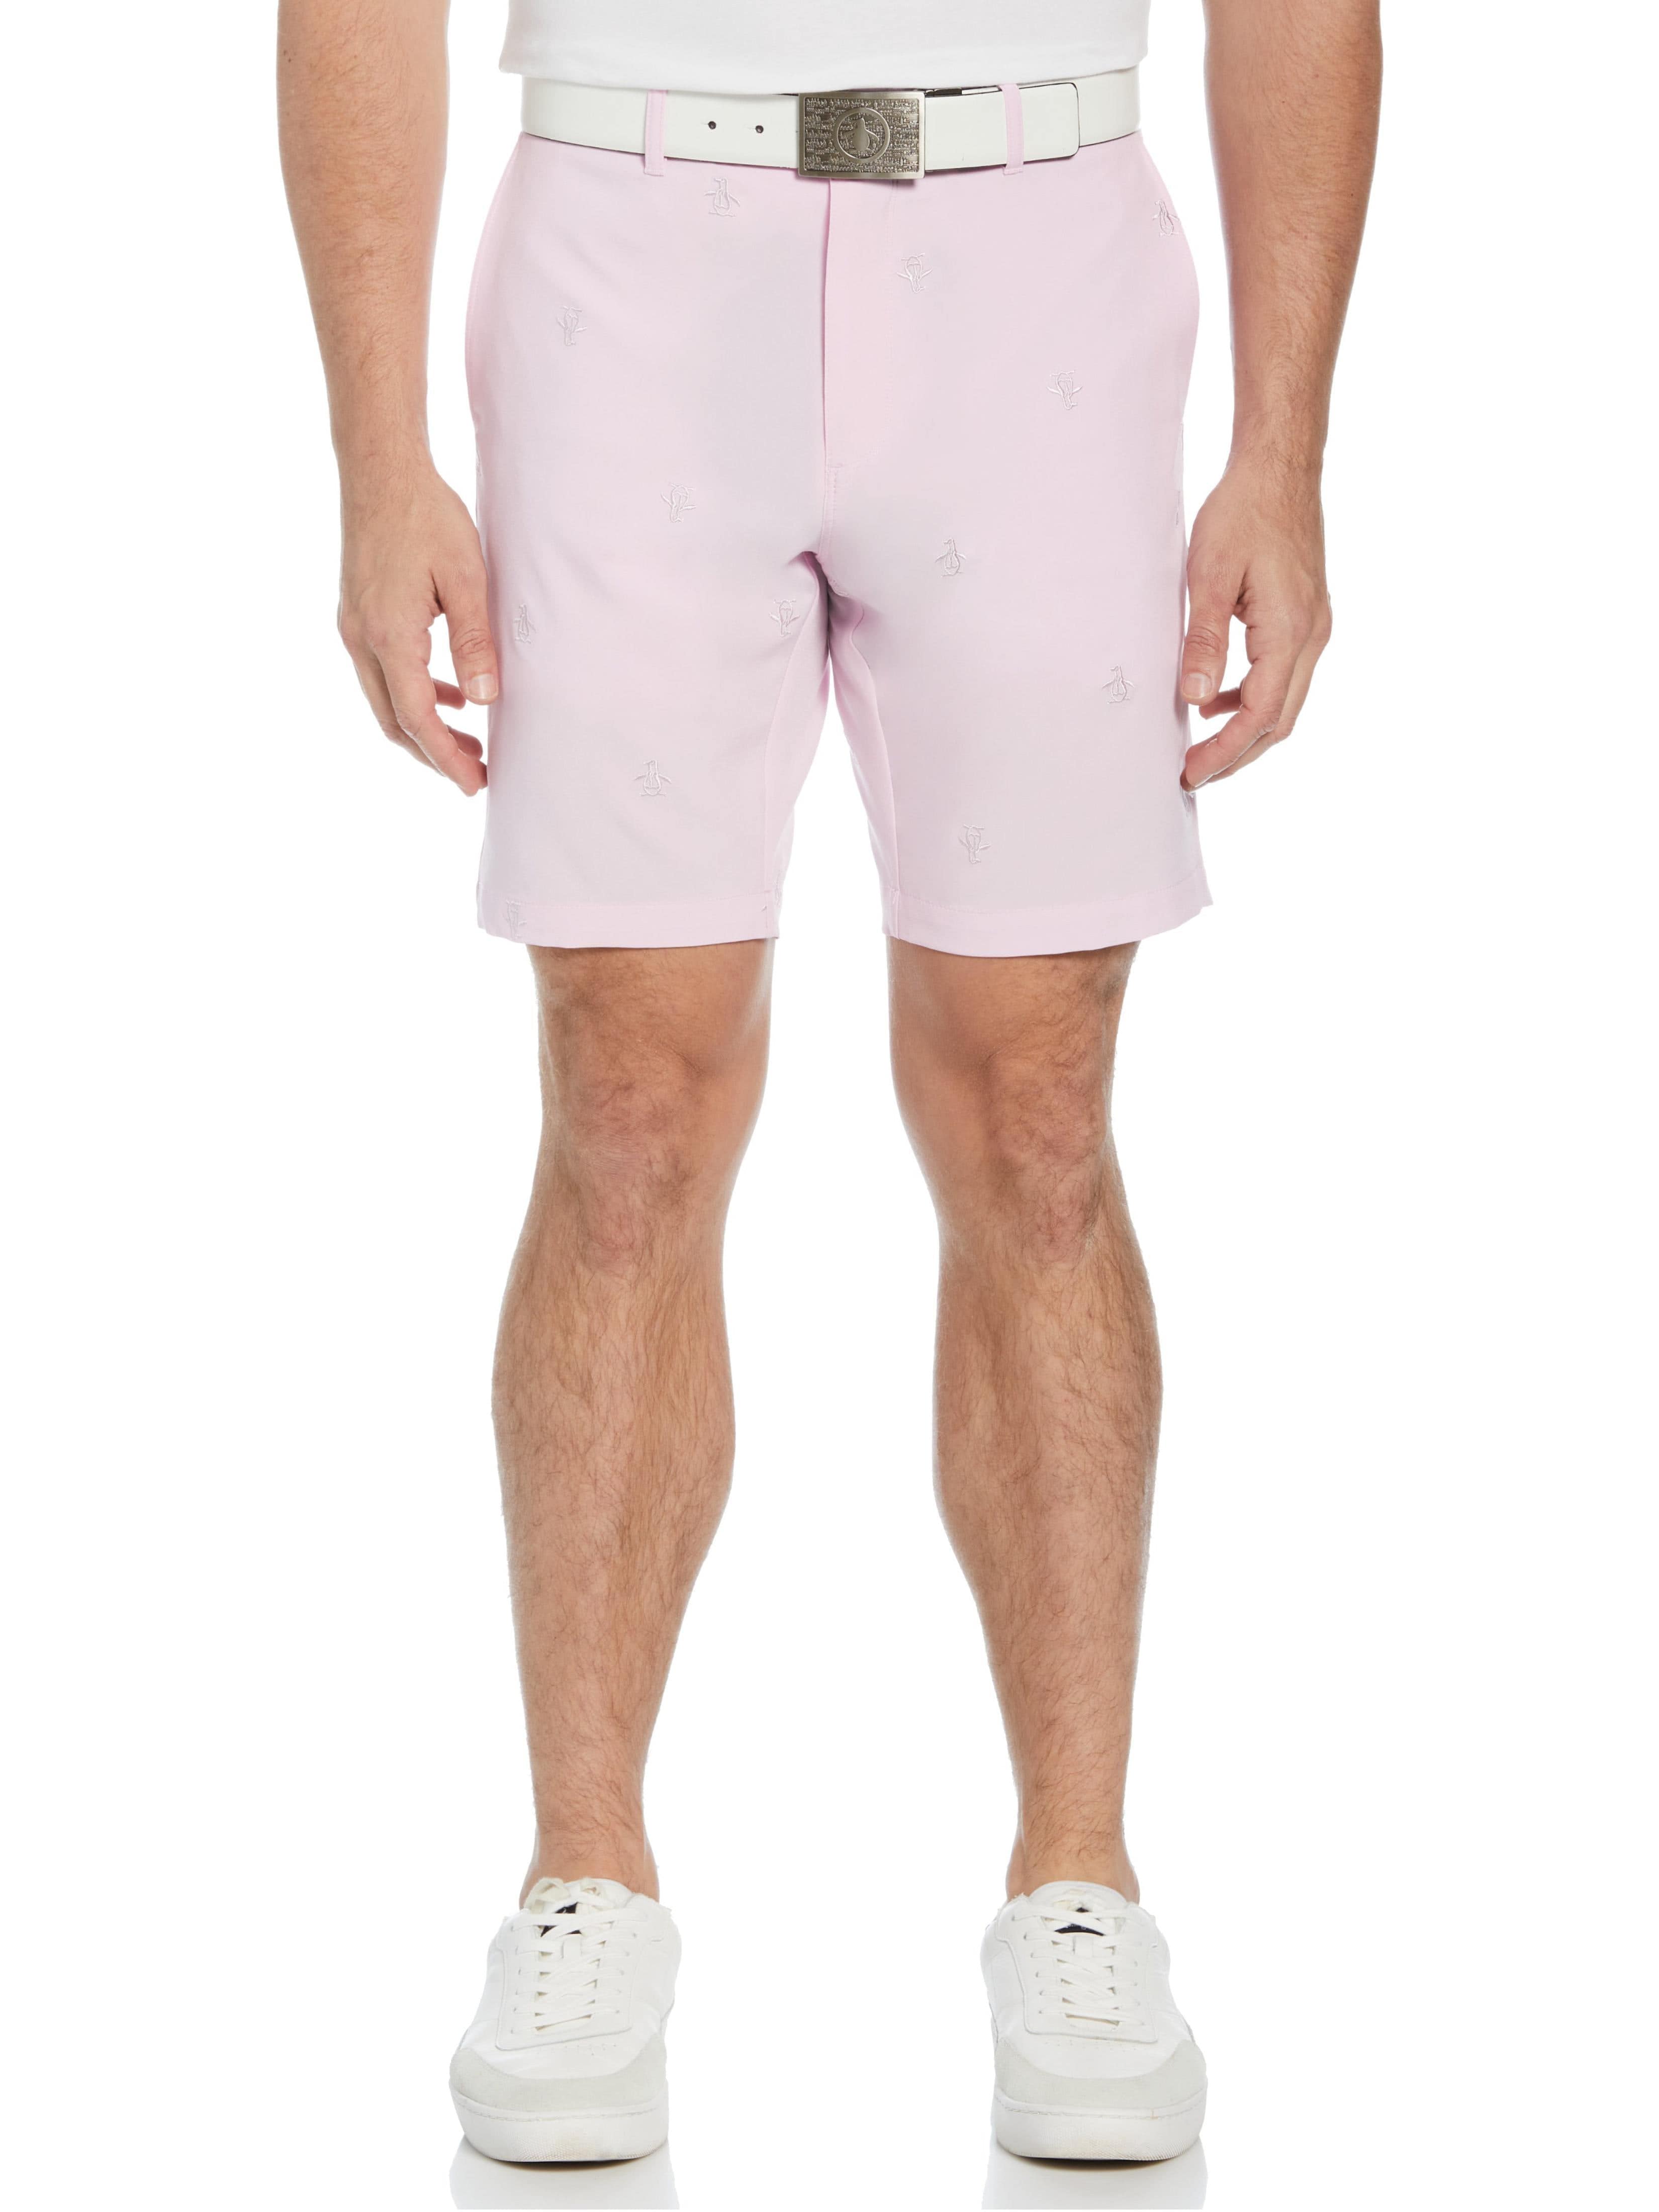 Original Penguin Mens Allover Embroidered Pete 9" Golf Shorts, Size 30, Piroutte Pink, Polyester/Spandex | Golf Apparel Shop